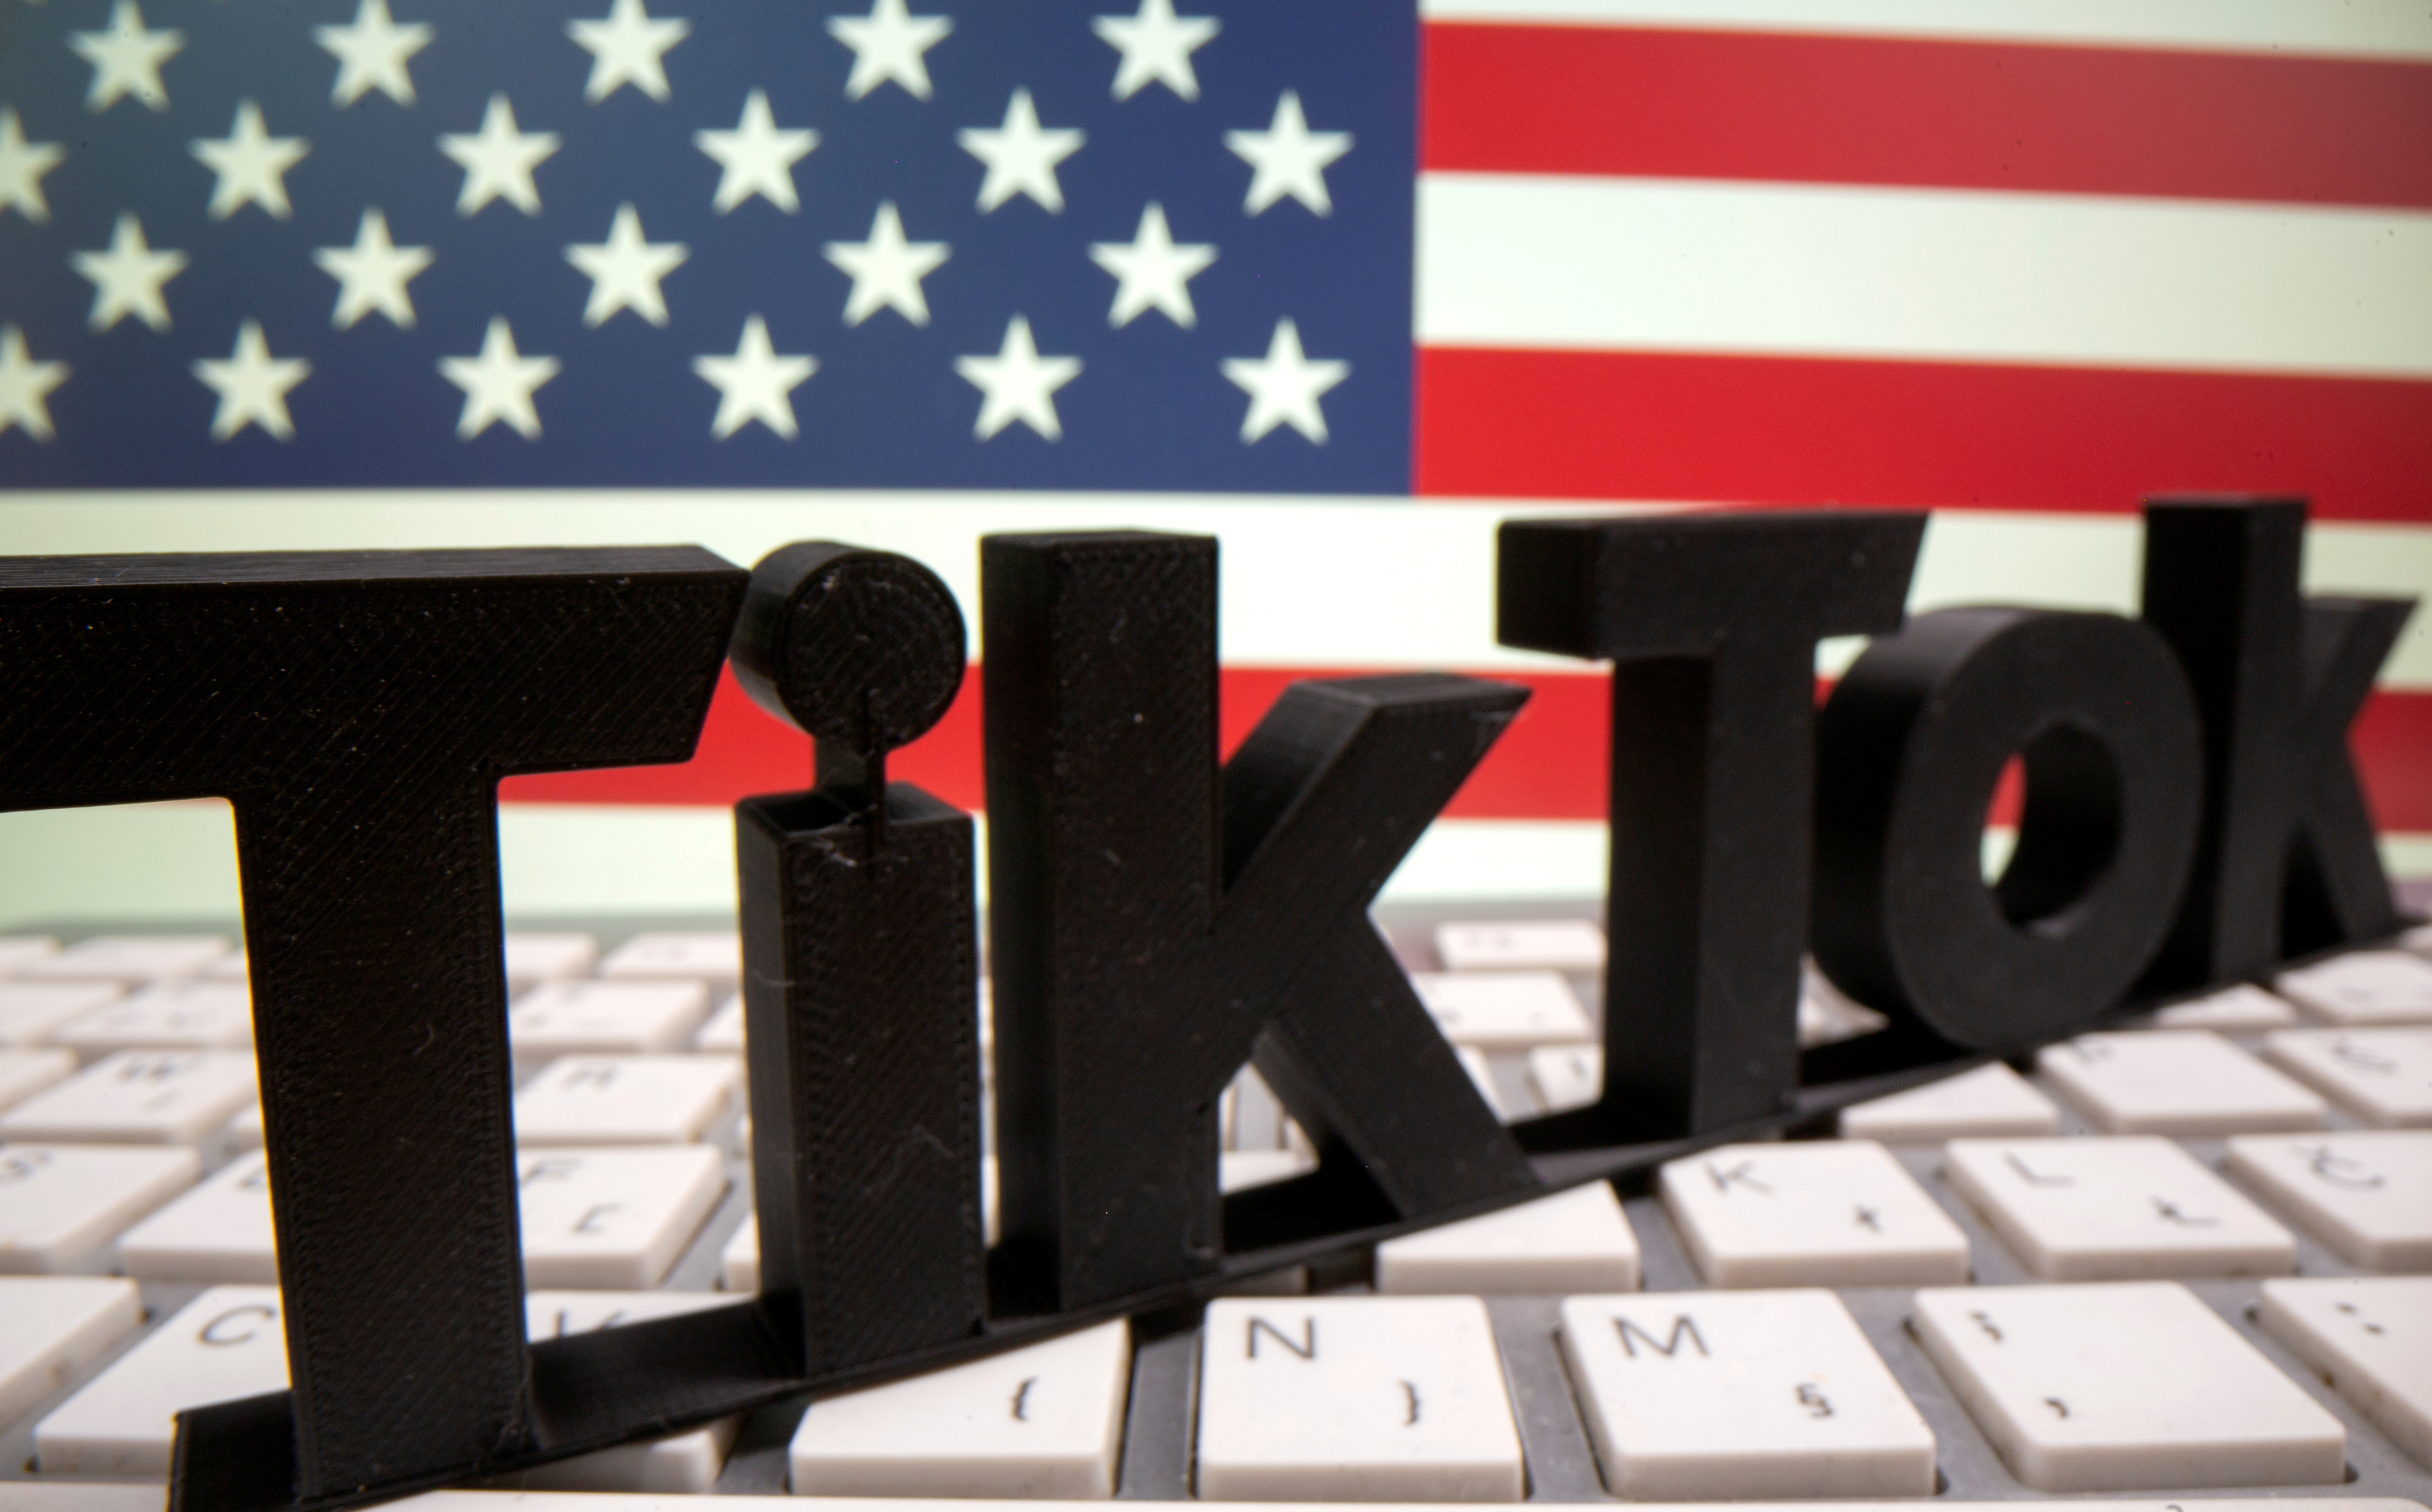 A 3D printed Tik Tok logo is placed on a keyboard in front of U.S. flag in this illustration taken Oct. 6, 2020. REUTERS/Dado Ruvic